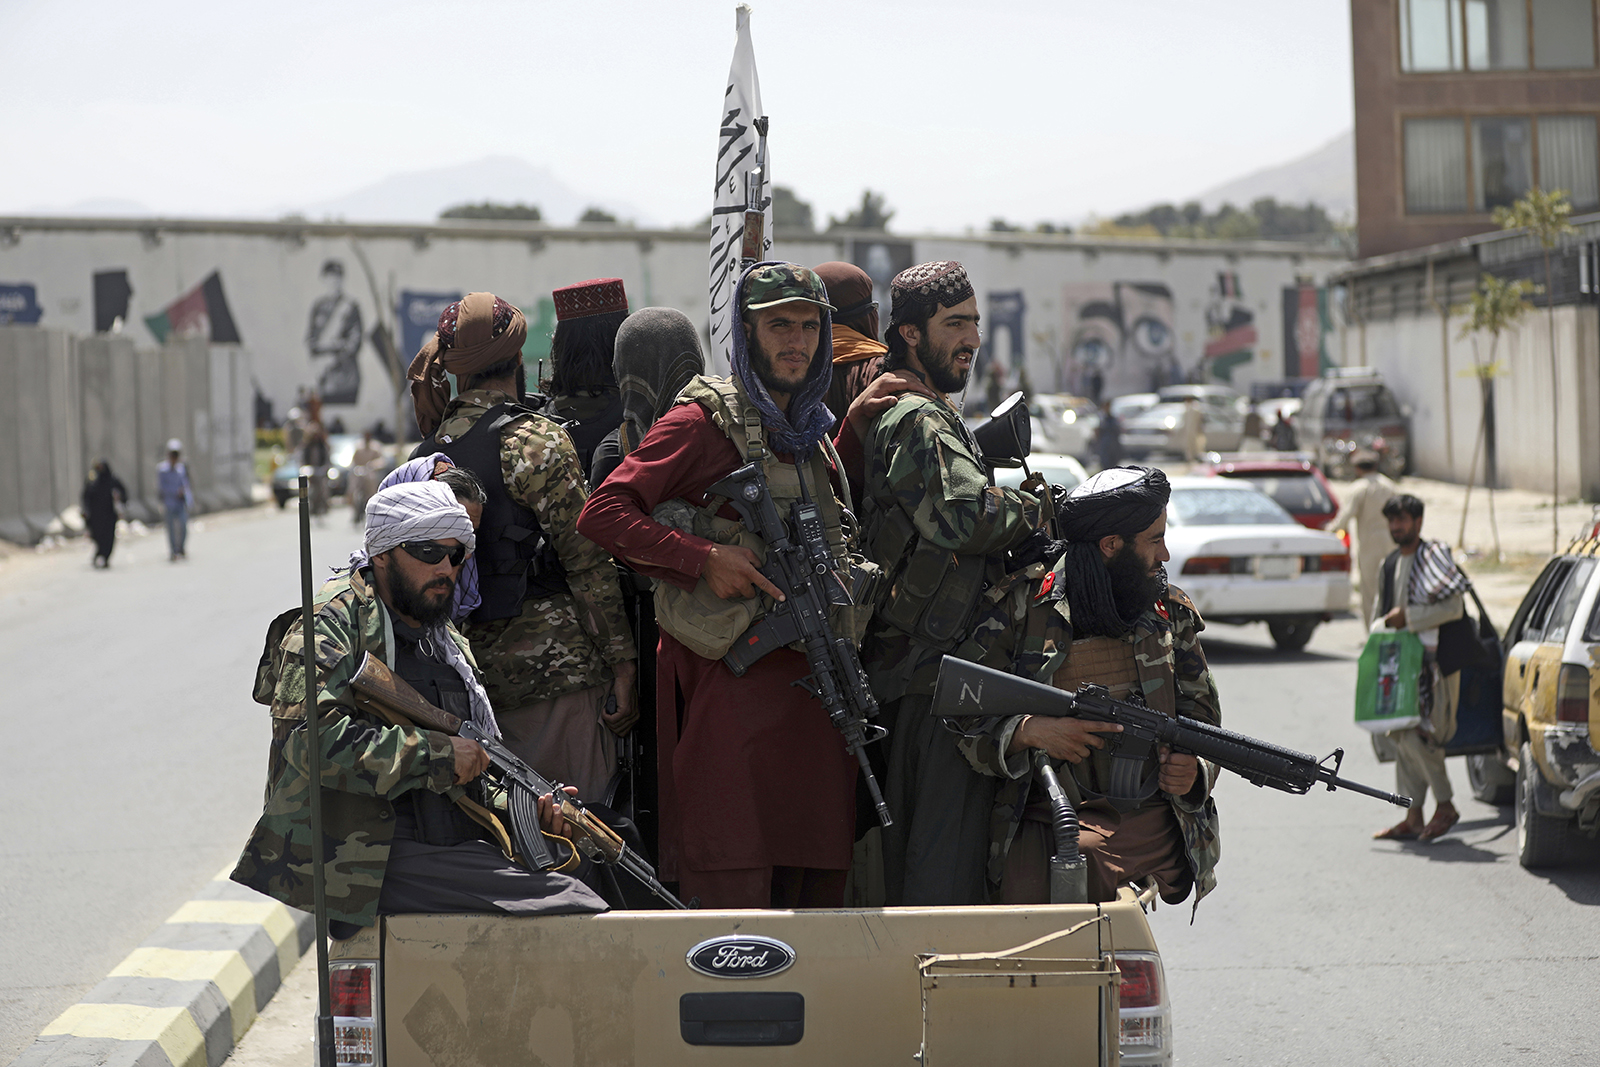 In this Aug. 19, 2021, file photo, Taliban fighters patrol in Kabul, Afghanistan. In the U.S. departure from Afghanistan, China has seen the realization of long-held hopes for a reduction of the influence of a geopolitical rival in what it considers its backyard. Yet, it is also deeply concerned that the very withdrawal could bring instability to that backyard — Central Asia — and possibly even spill over the border into China itself in its heavily Muslim northwestern region of Xinjiang. (AP Photo/Rahmat Gul, File)